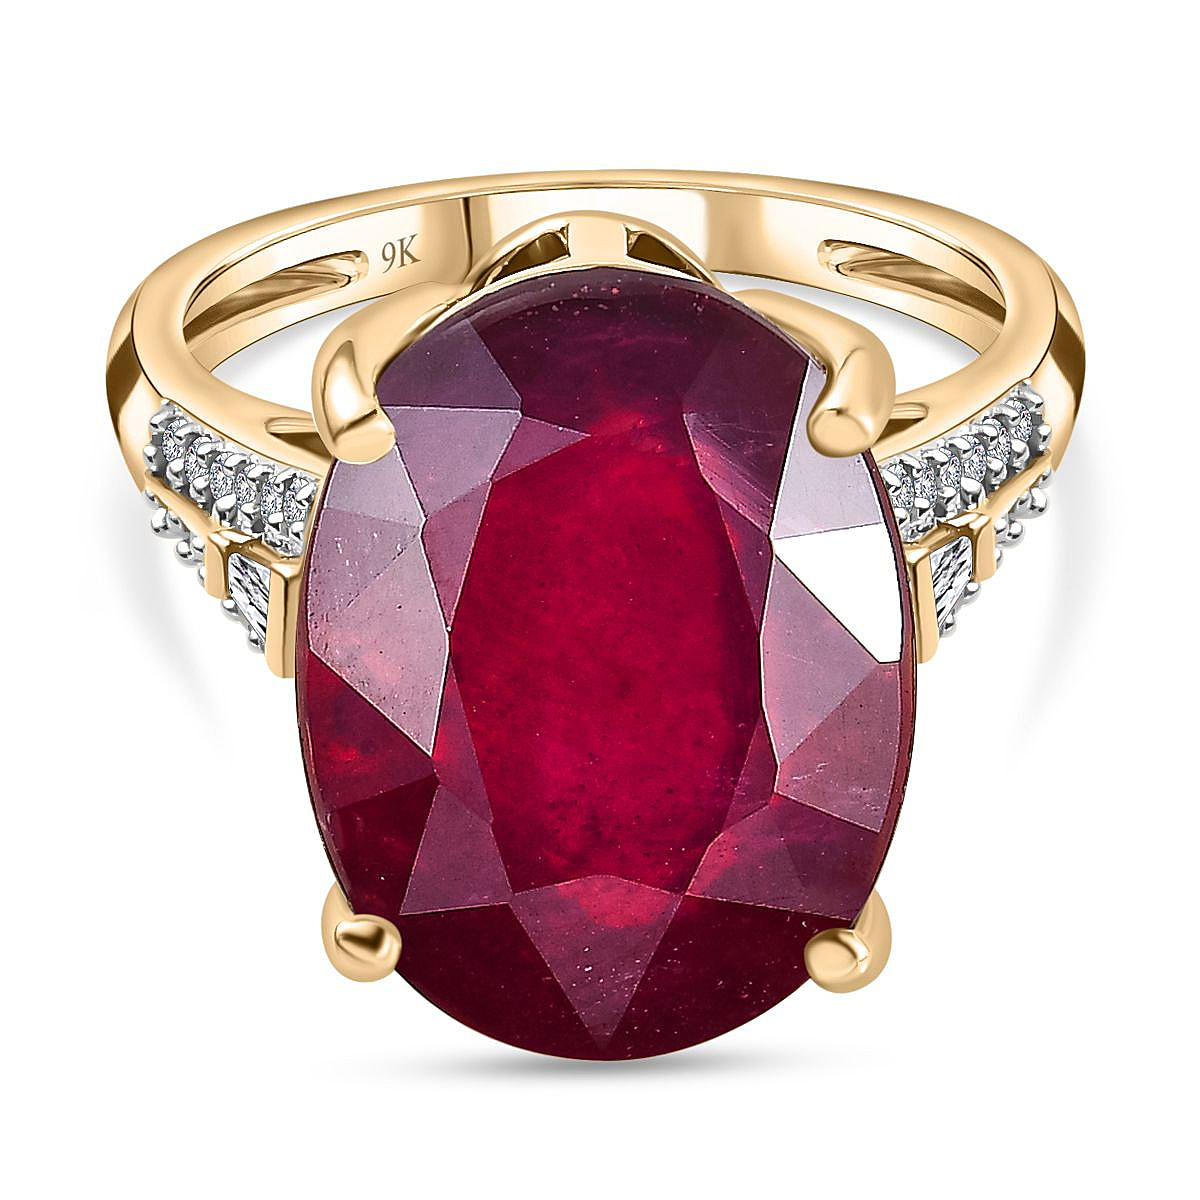 9K Yellow Gold AAA African Ruby 15.5cts & Diamond Ring Gold Wt. 3.79 Gms